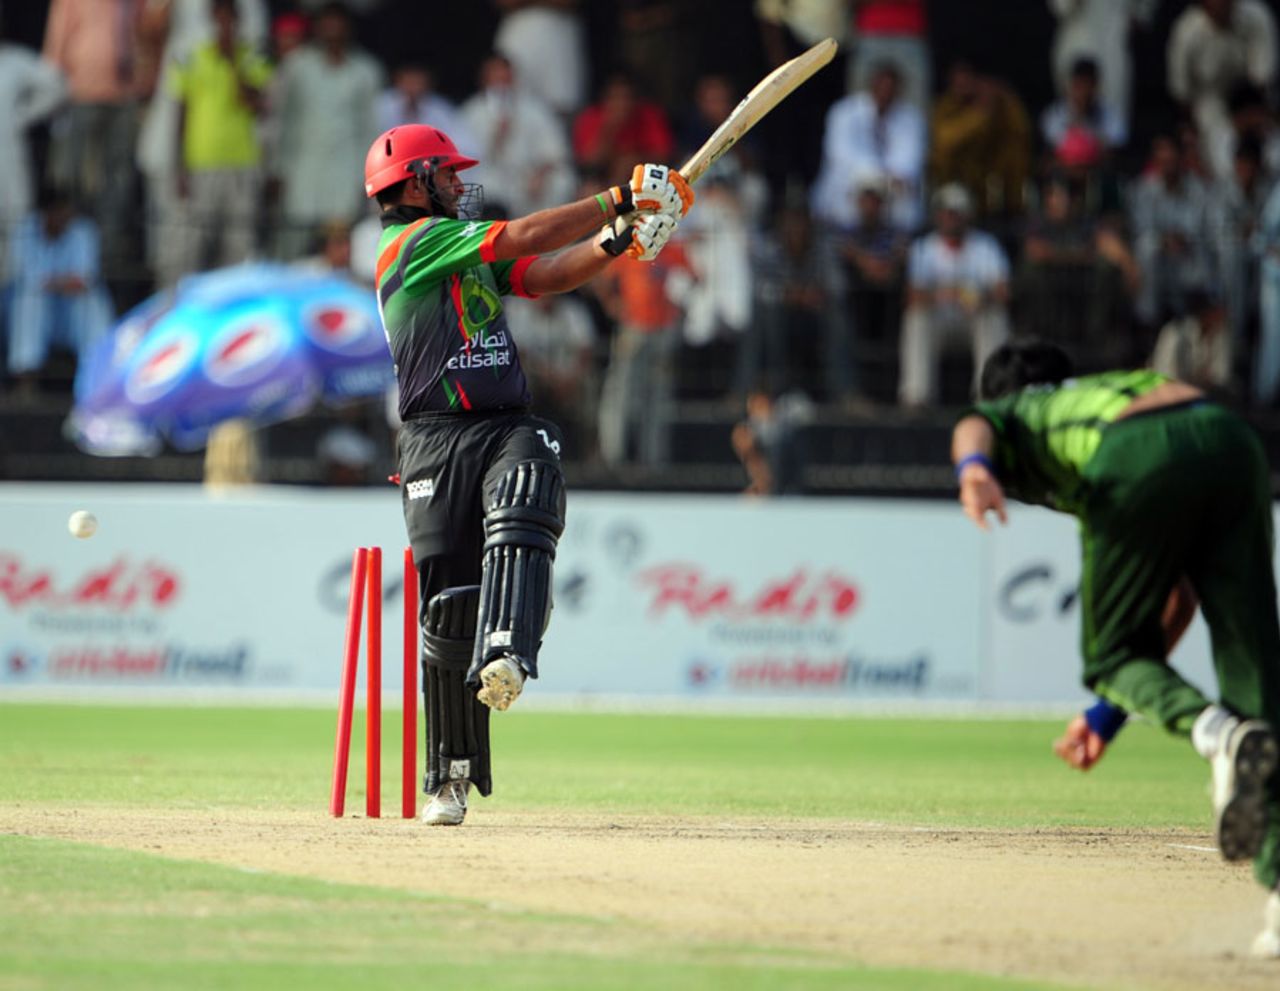 Noor Ali Zadran was bowled by Mohammad Talha for 51, Pakistan A v Afghanistan, 3rd unofficial ODI, Faisalabad, May 29, 2011